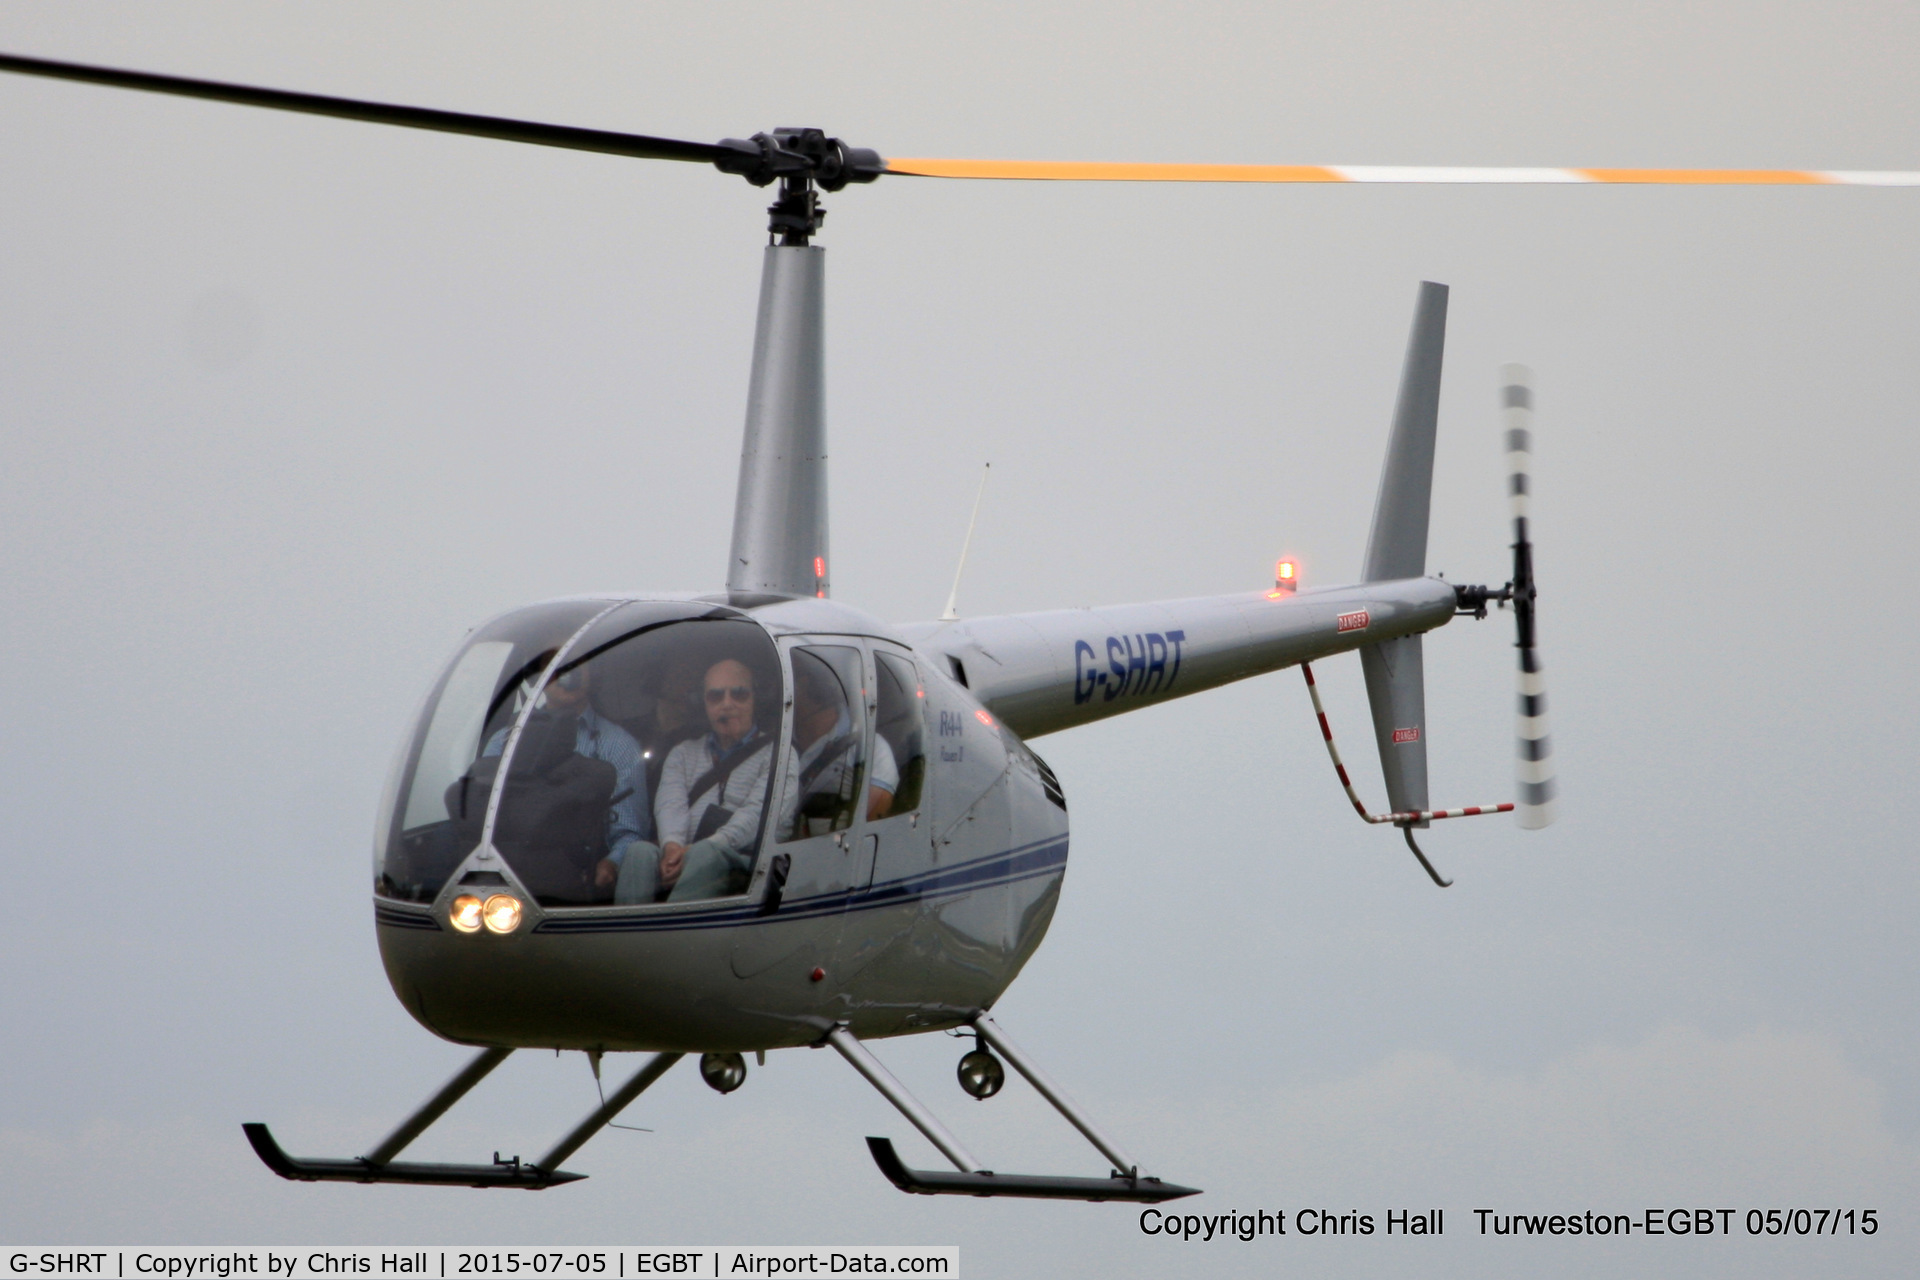 G-SHRT, 2004 Robinson R44 II C/N 10473, ferrying race fans to the British F1 Grand Prix at Silverstone